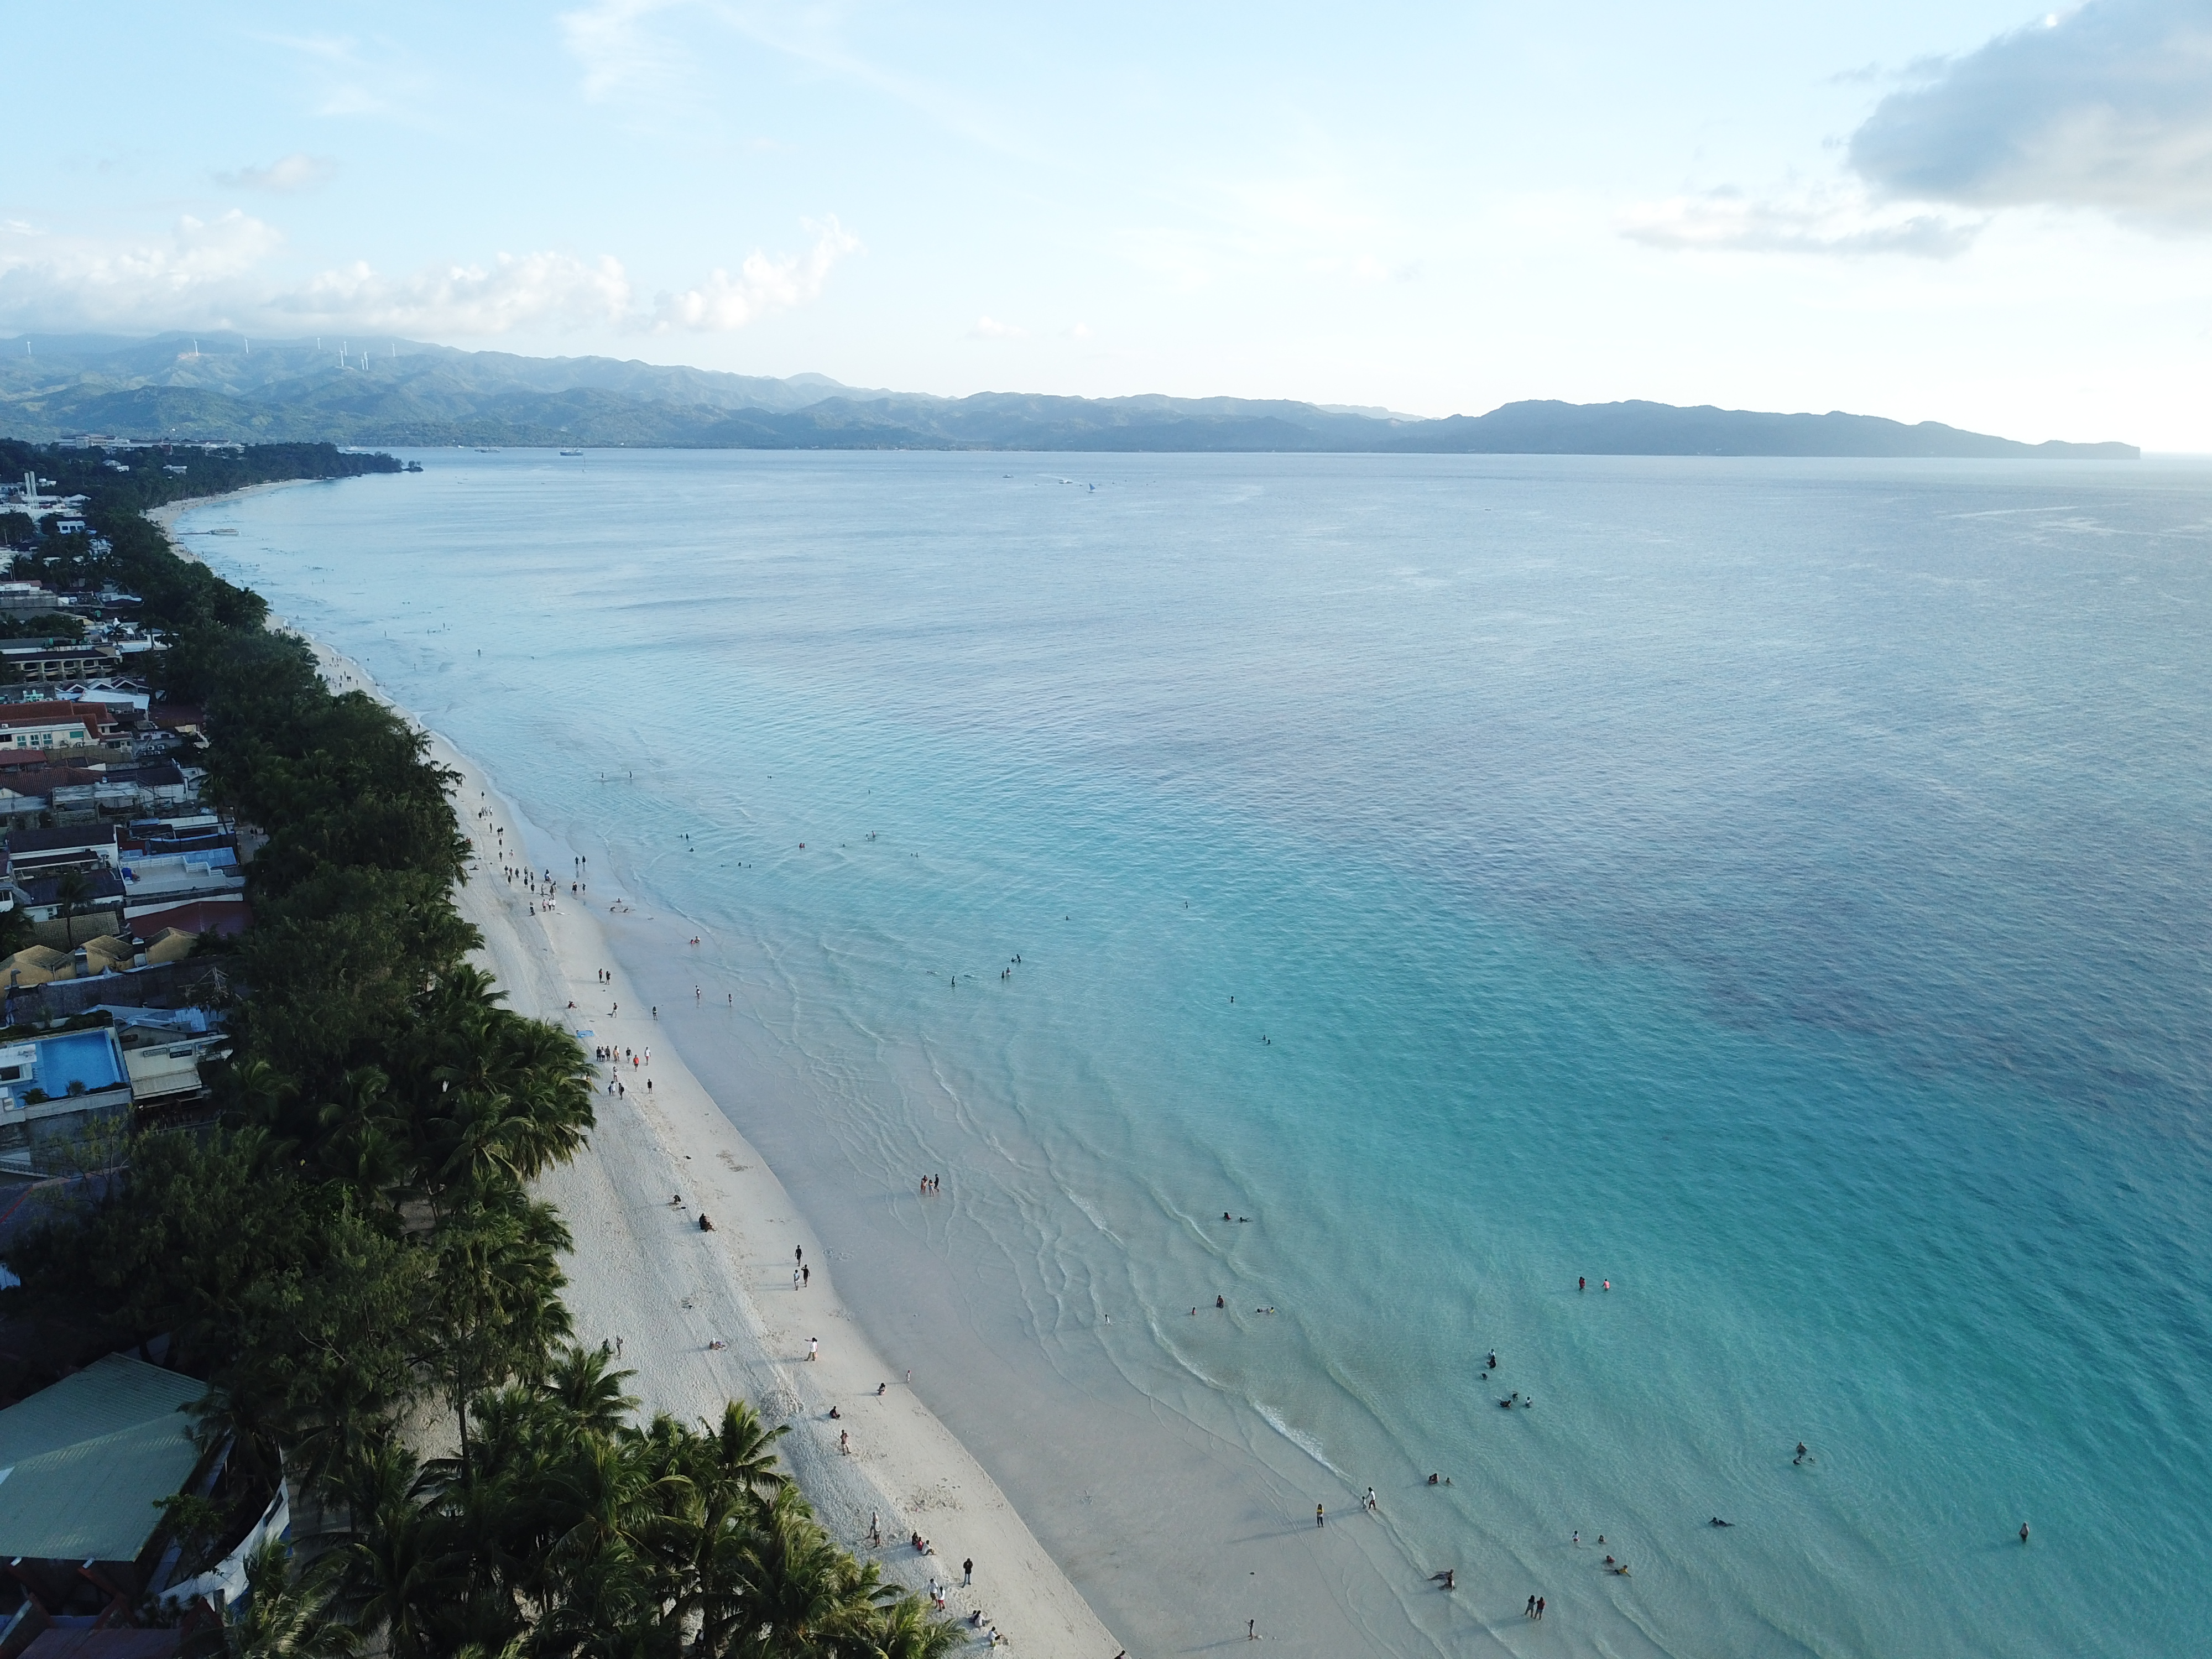 Boracay finally reopens for tourism on October 26, 2018 after six months of rehabilitation.